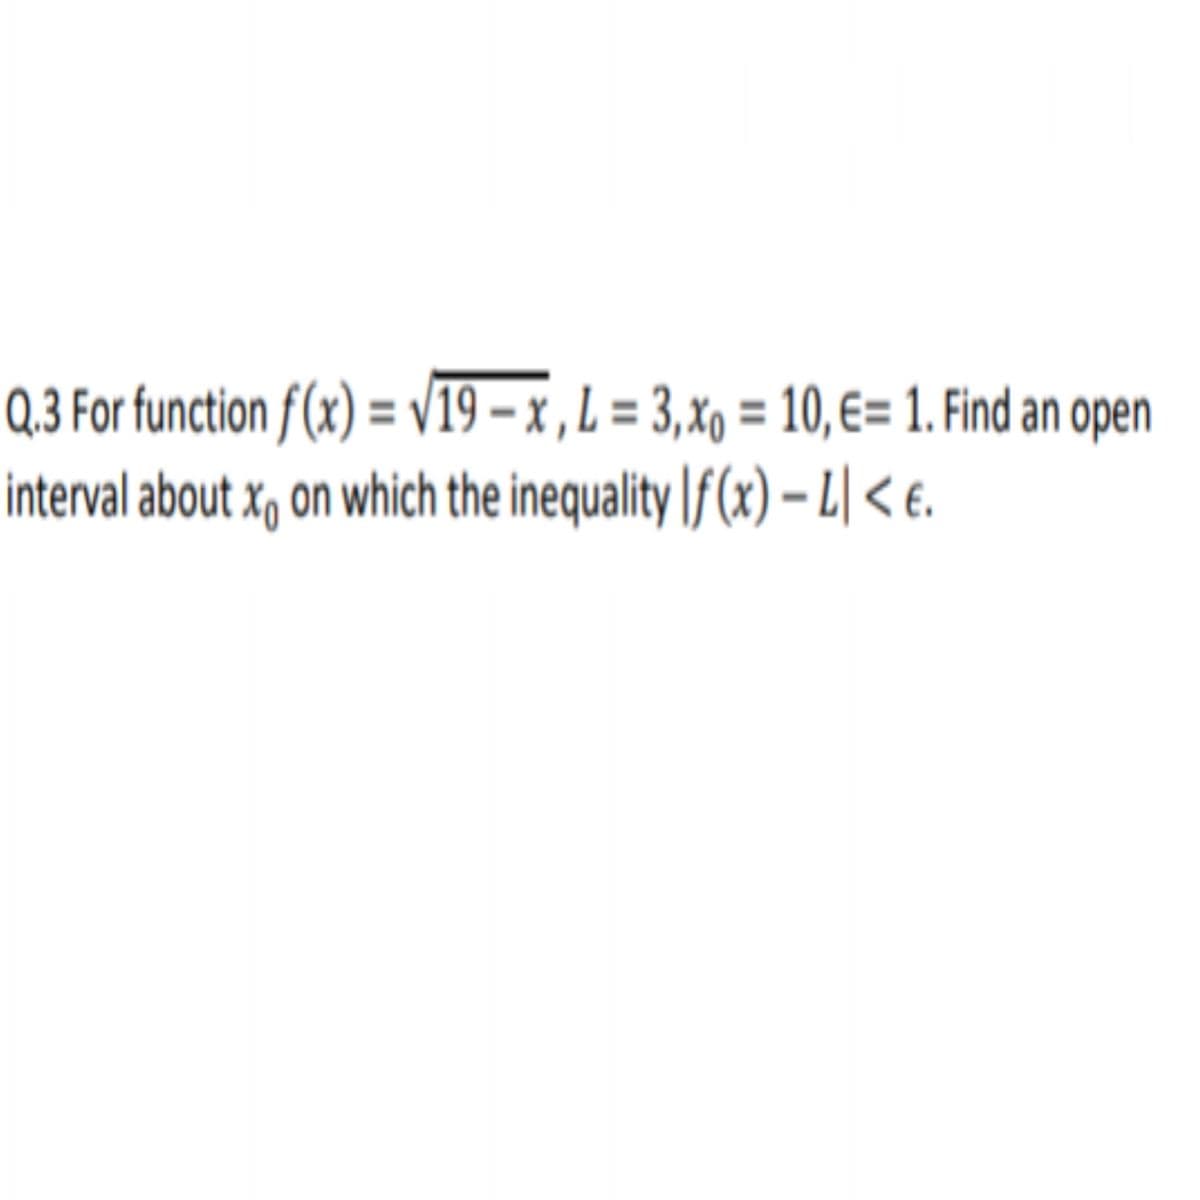 Q,3 For function f(x) = V19 – x , L = 3,xo = 10,€= 1. Find an open
interval about x, on which the inequality |f (x) – L| < €.
